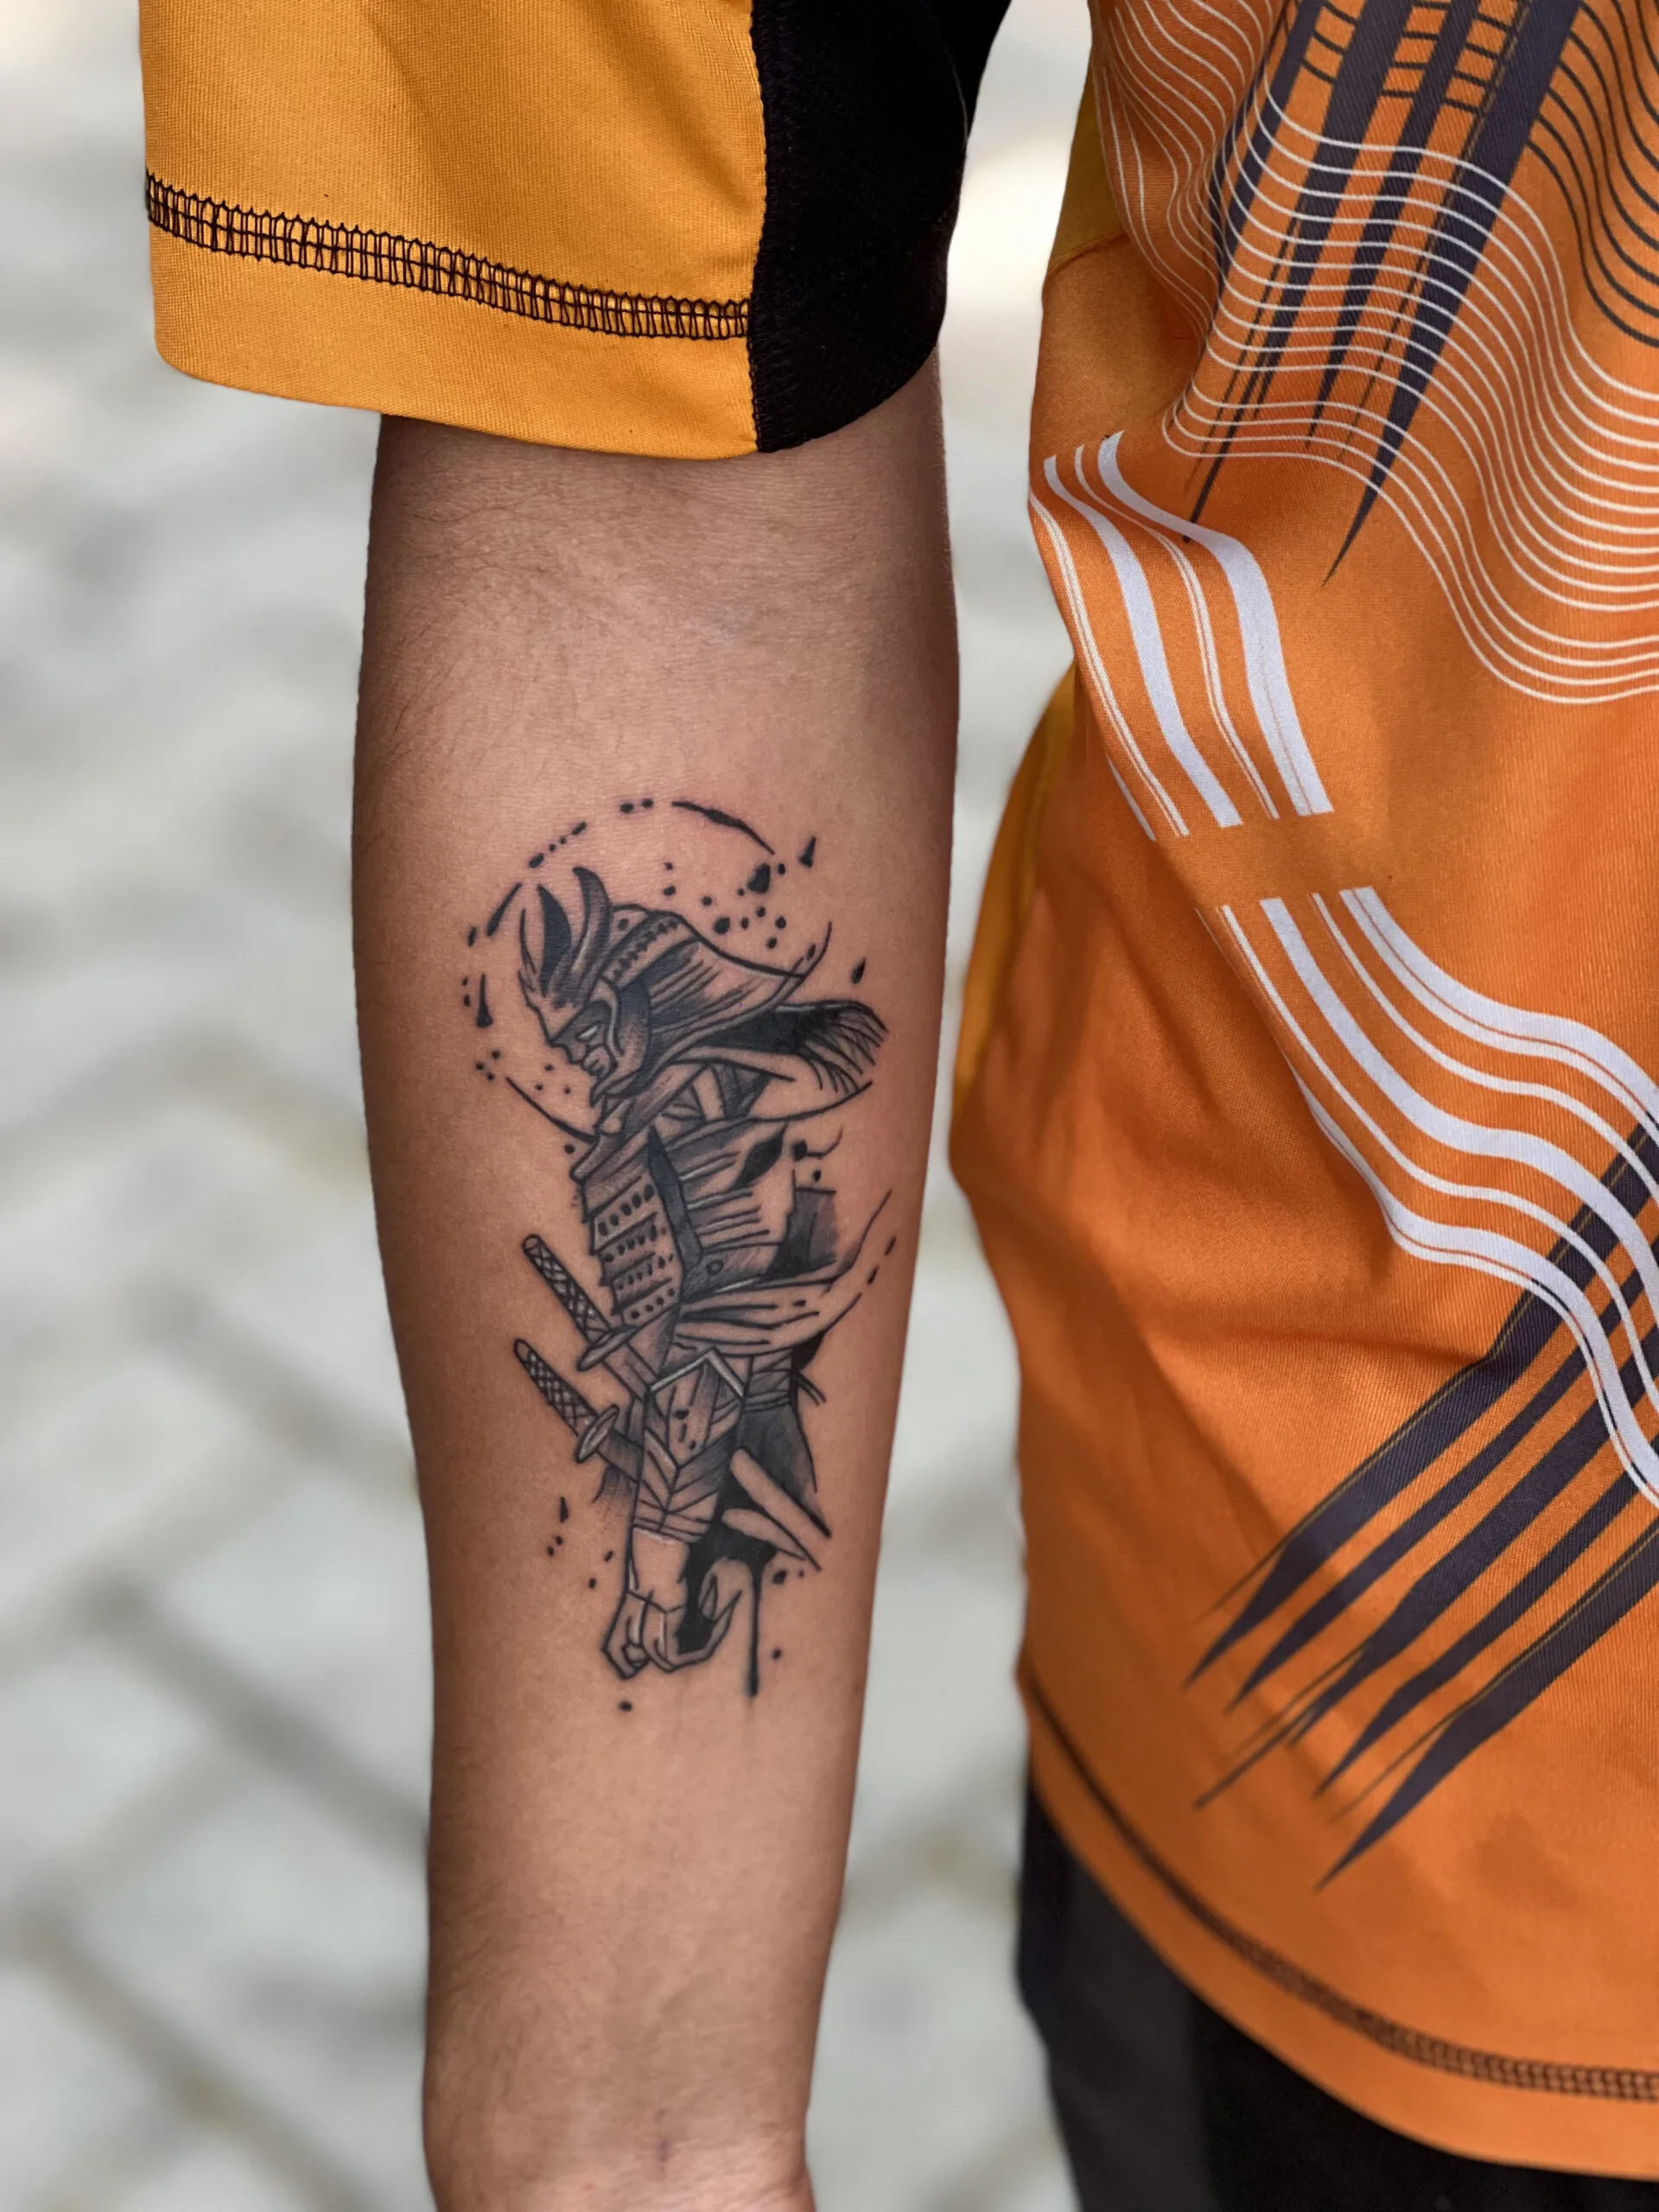 31 Tattoo For Boys: Unique And Stylish Ink Inspiration